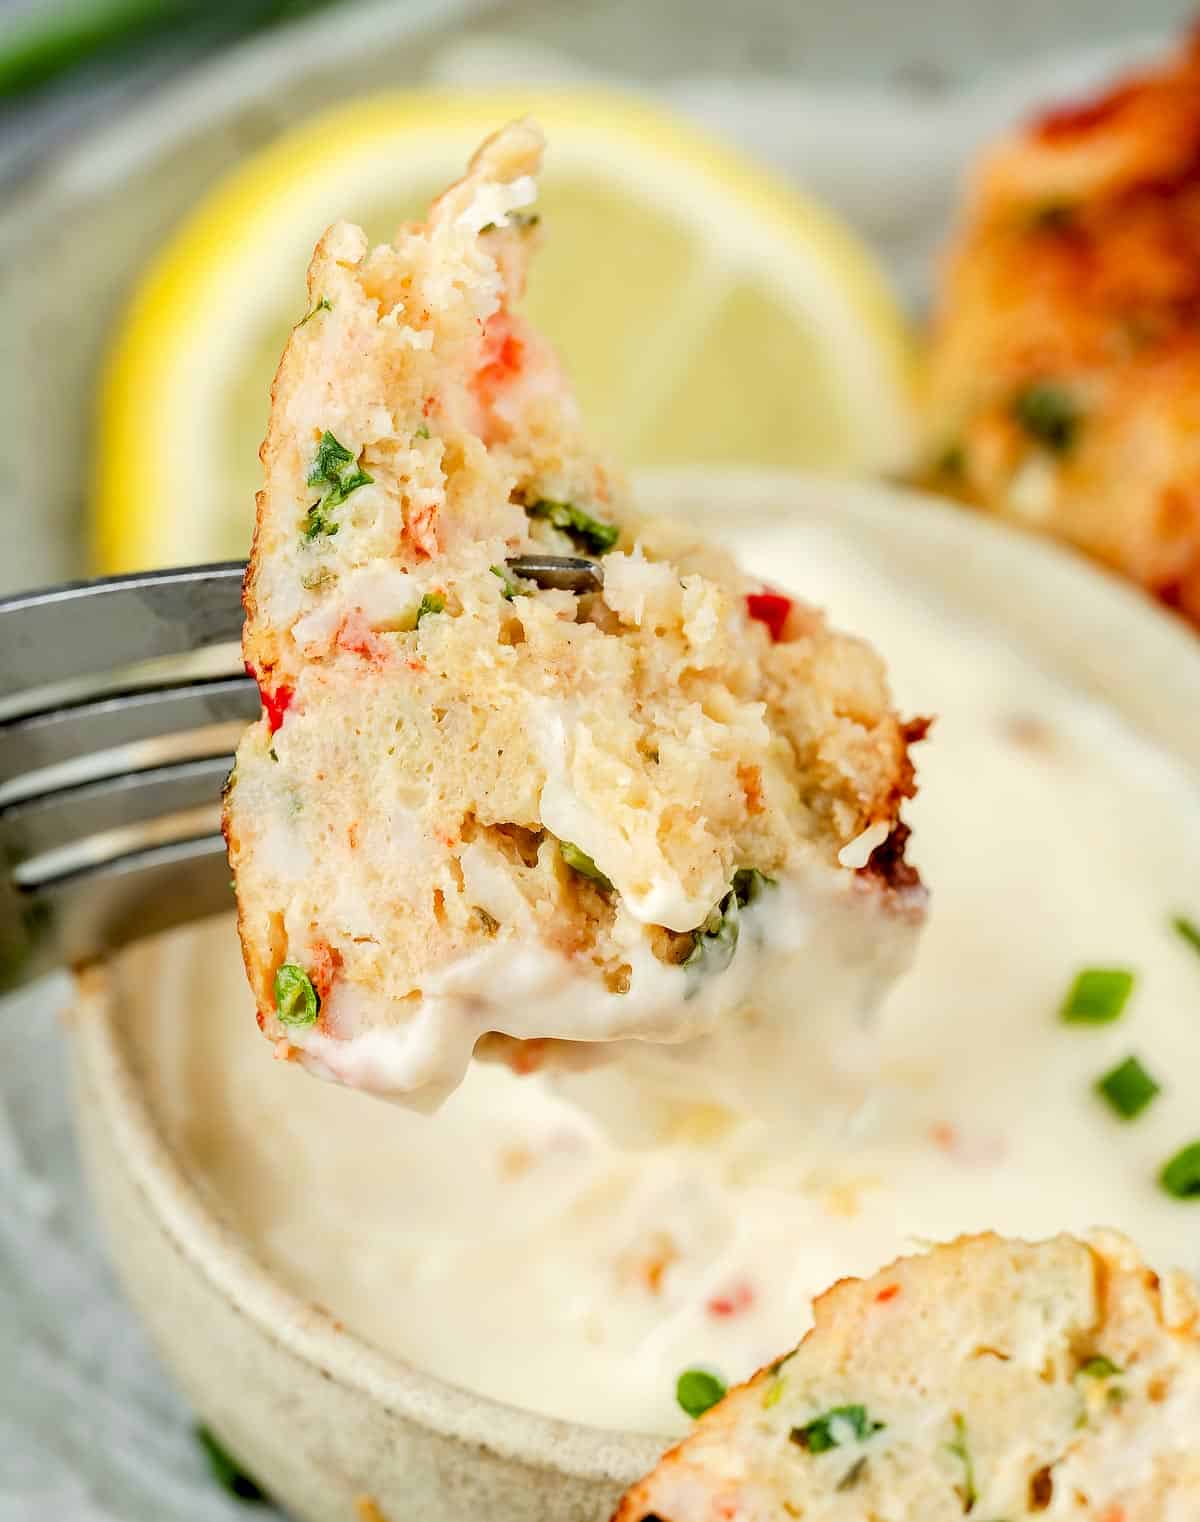 A succulent shrimp cake piece on a fork, tantalizingly dipped in flavorful lime-chili mayo